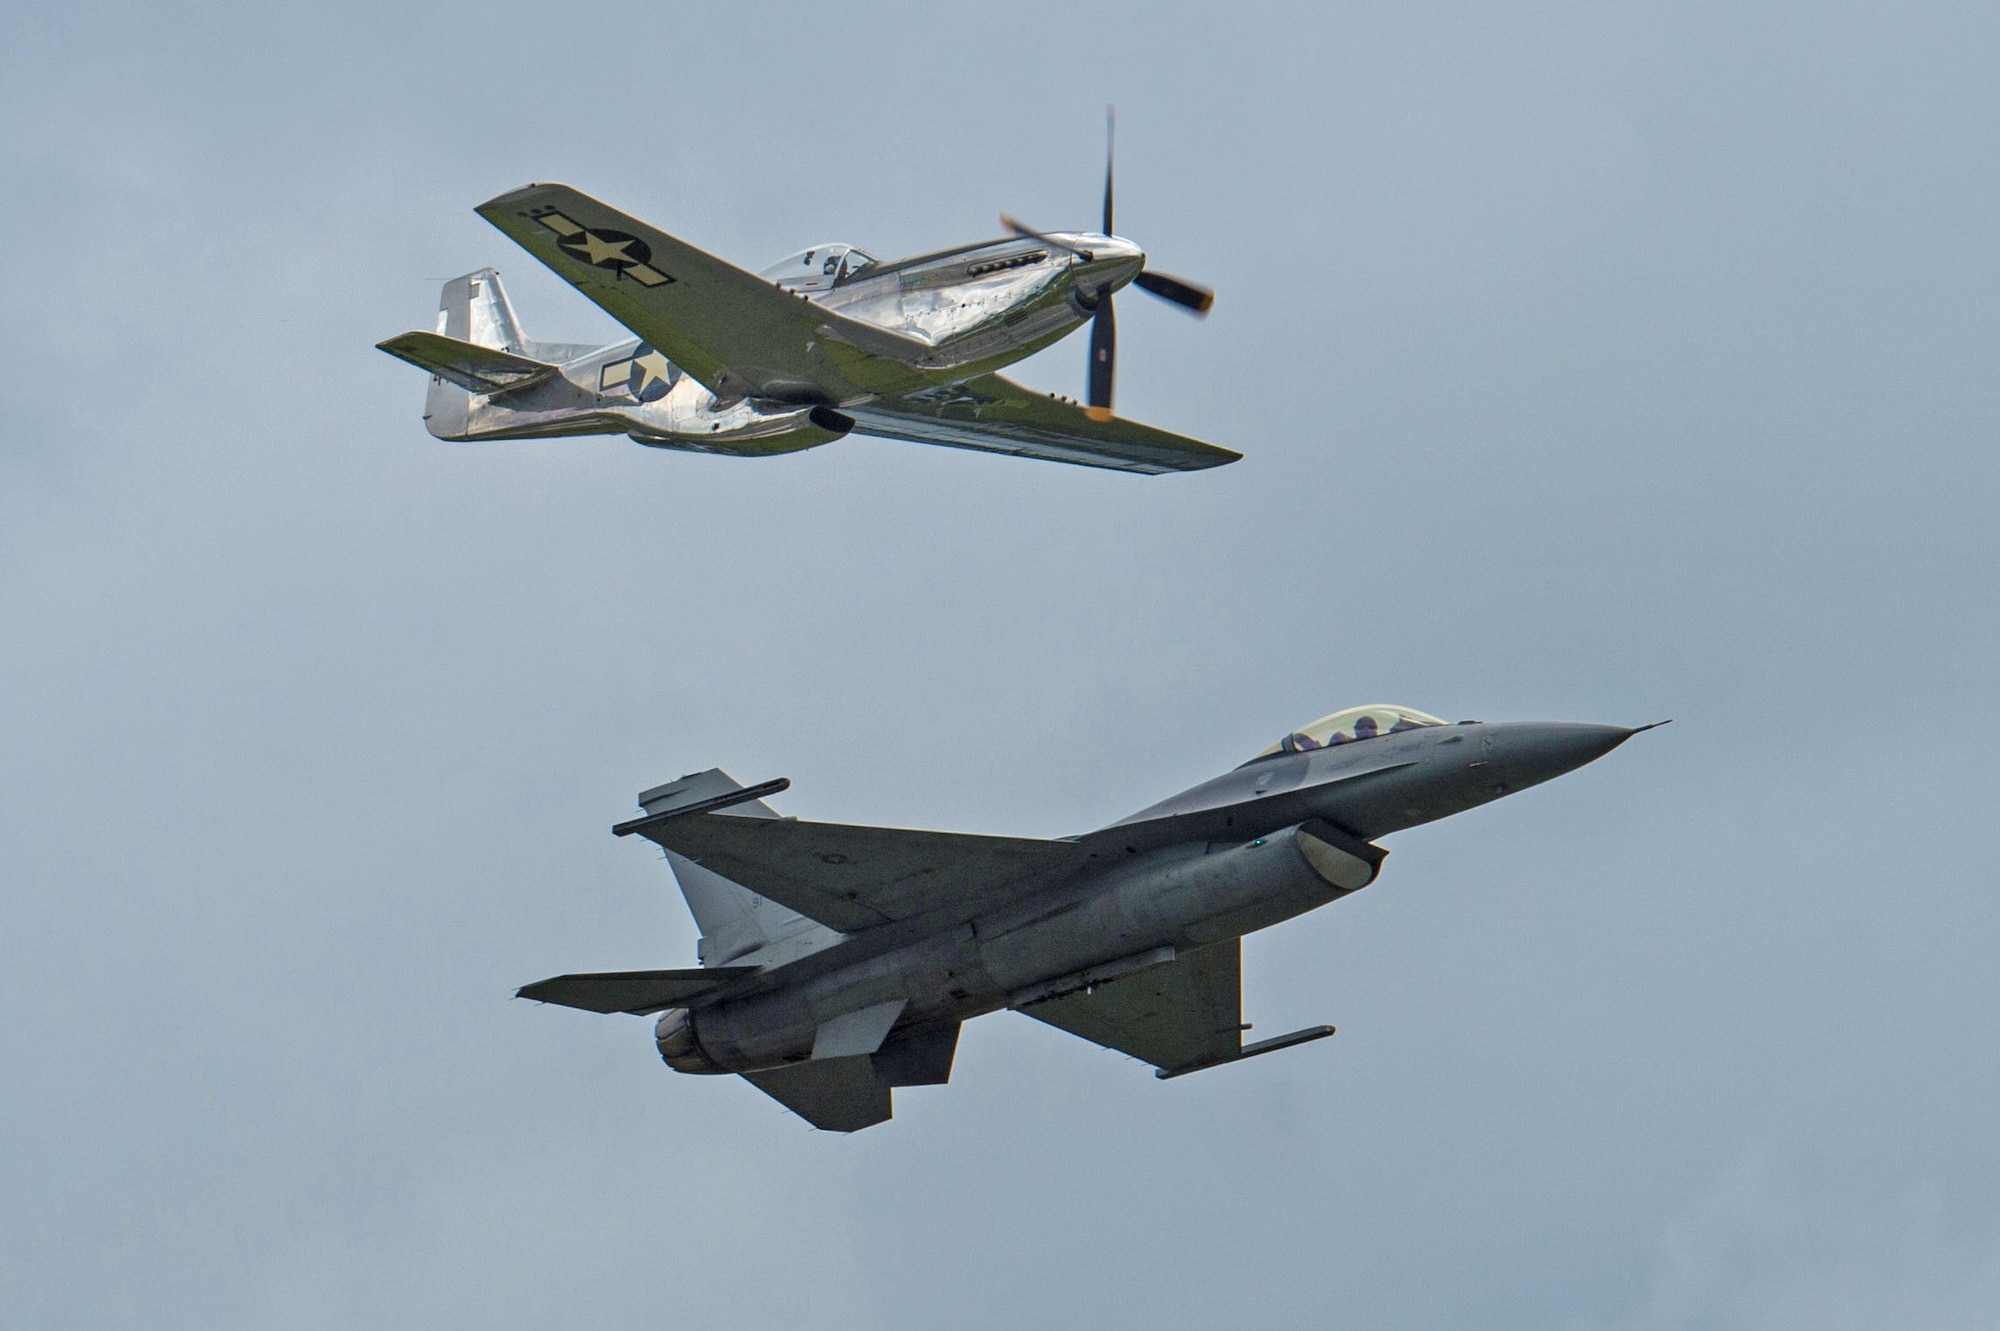 A P-51 Mustang flies above an F-16CM Fighting Falcon during a Heritage Flight performance at the New York Air Show at Stewart International Airport, N.Y., July 1, 2017. The 20th Fighter Wing, created July 28, 1947, began its journey flying P-51D Mustangs and currently flies F-16CM Fighting Falcons, providing combat-ready F-16 airpower and suppression of enemy air defenses. (U.S. Air Force photo by Airman 1st Class Sean Sweeney)